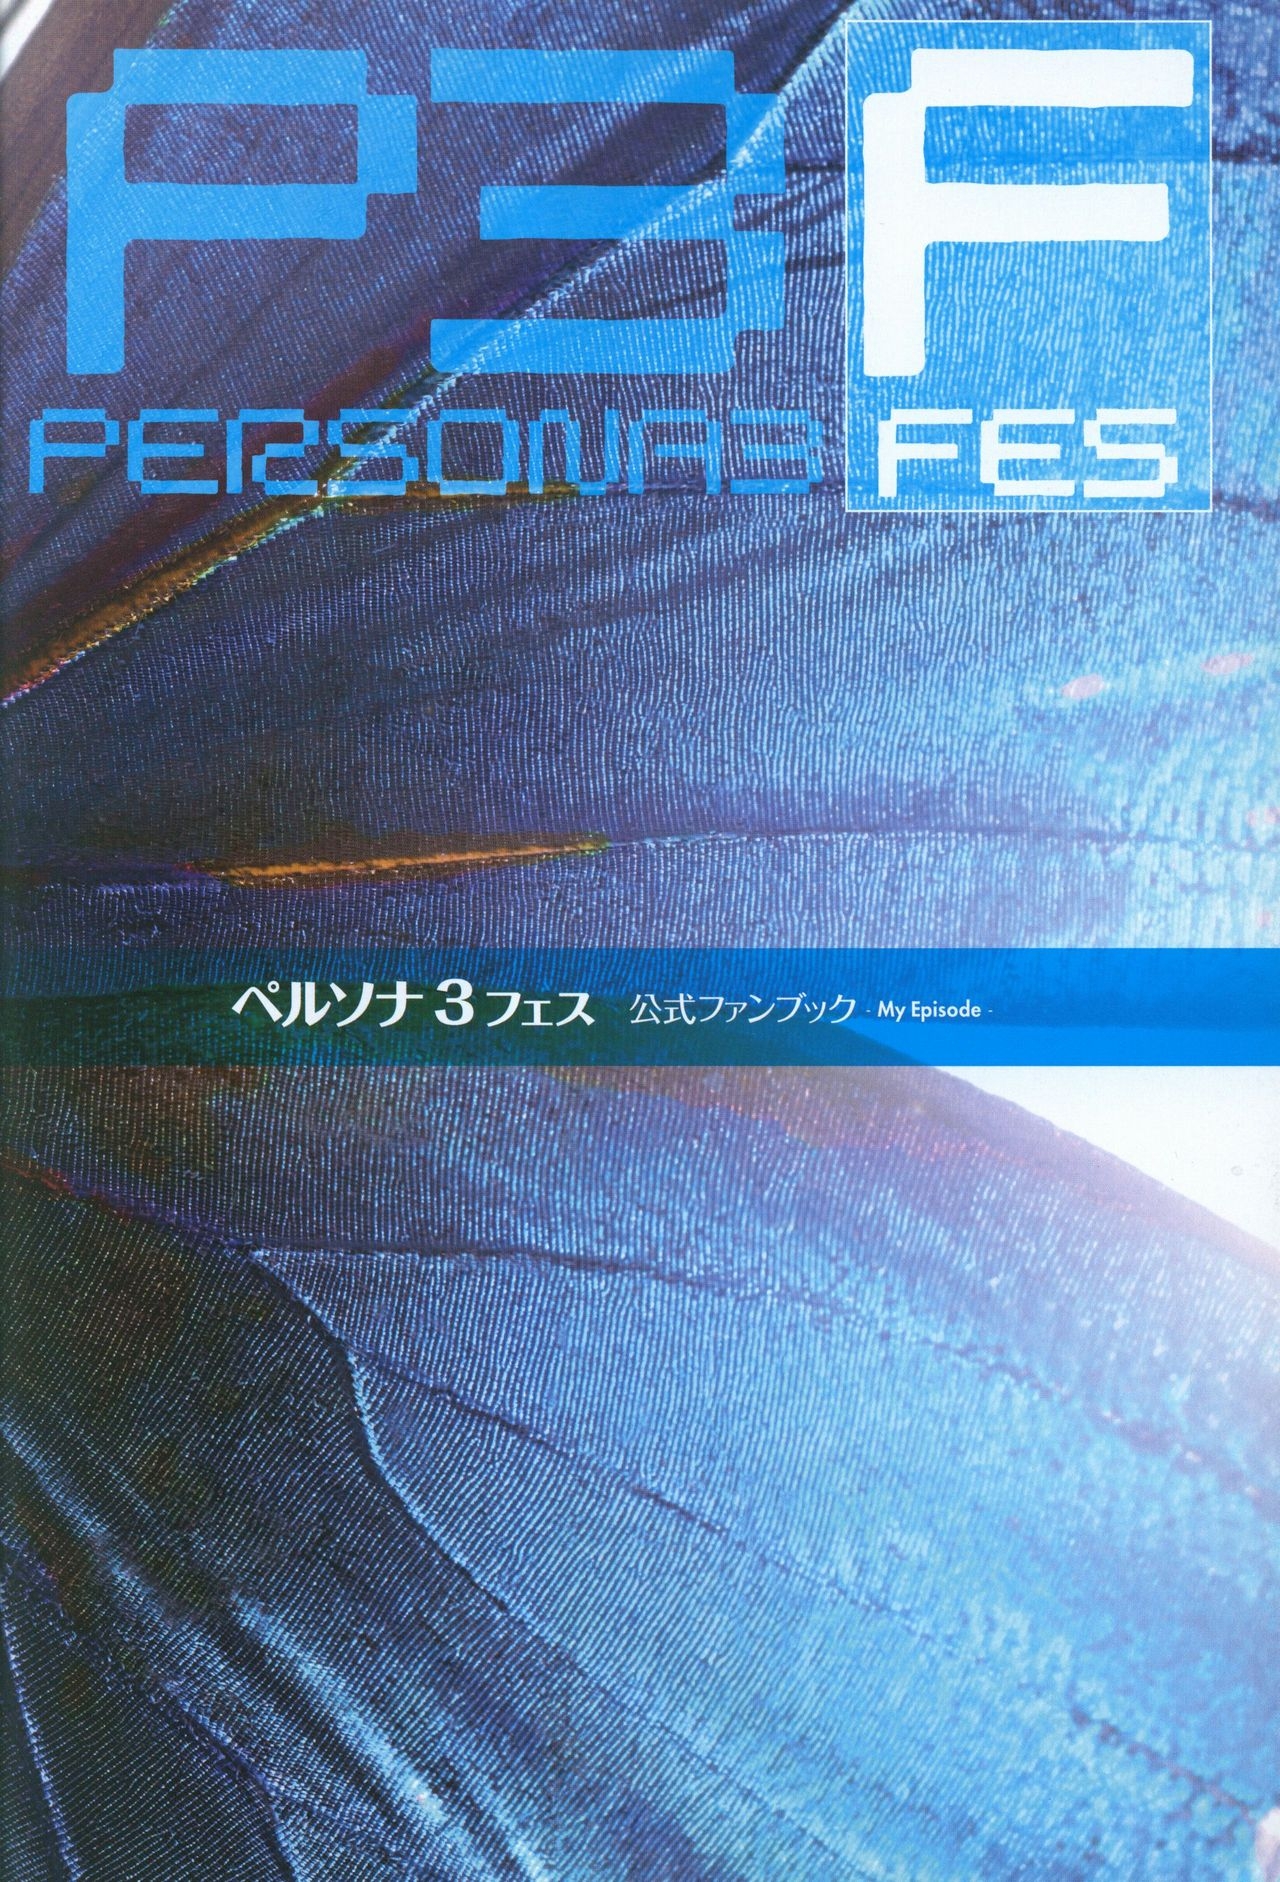 Persona 3 Fes Official Fan Book -My Episode- 2